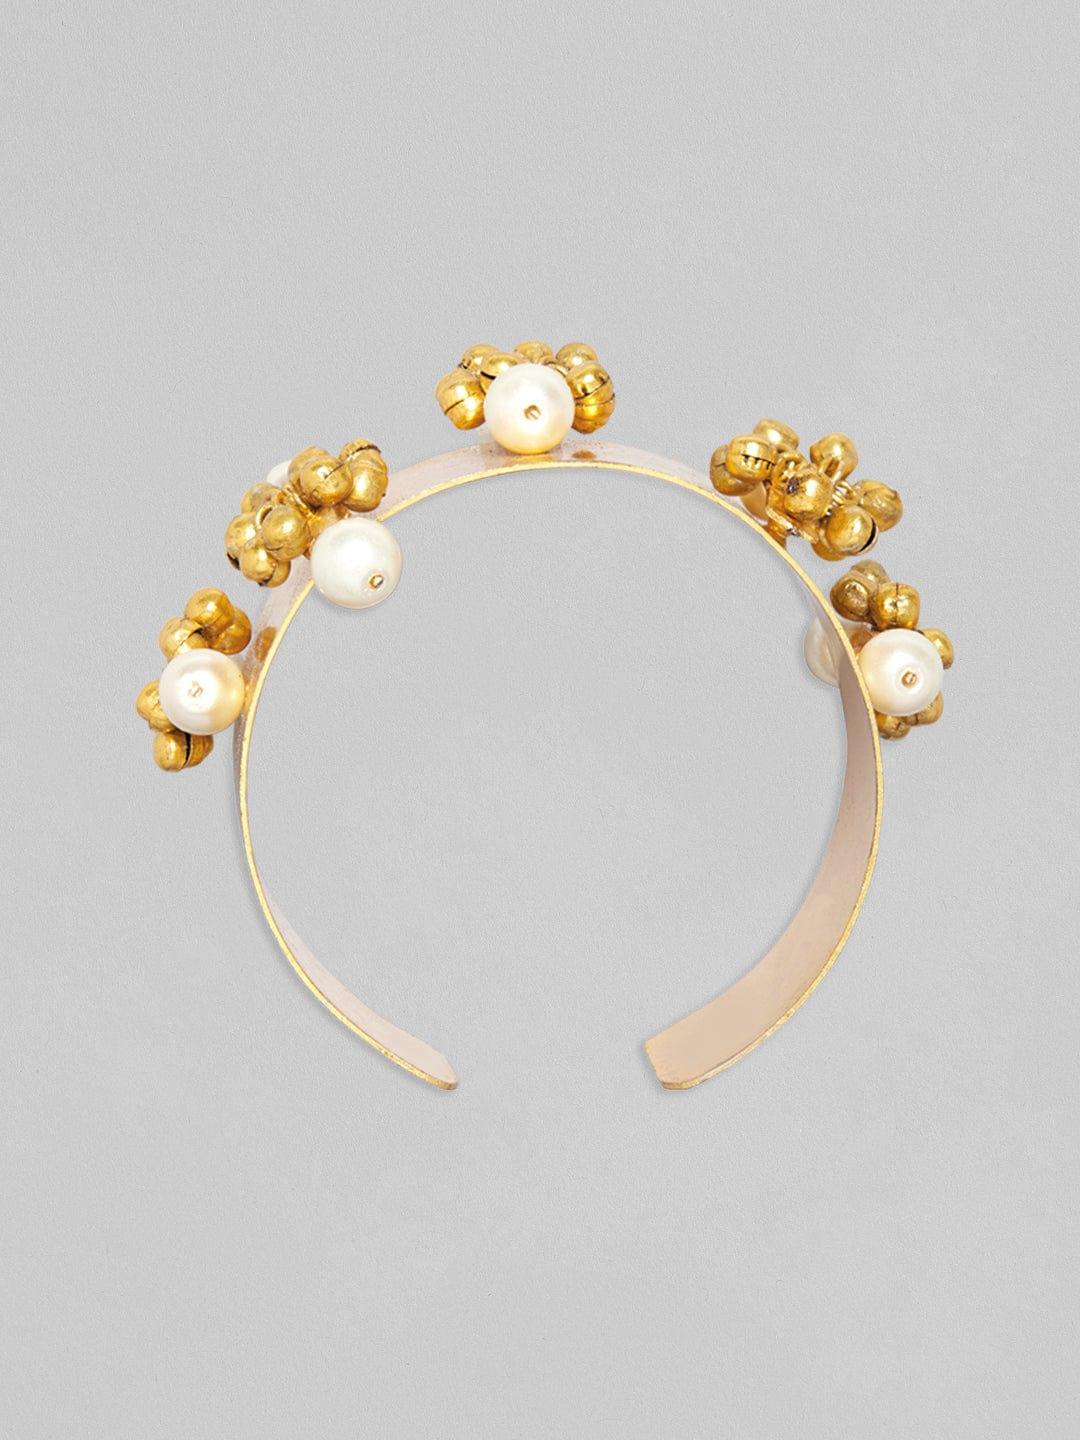 Rubans 24K Gold Plated Handcrafted Bracelet With Pearls And Golden Beads - Indiakreations